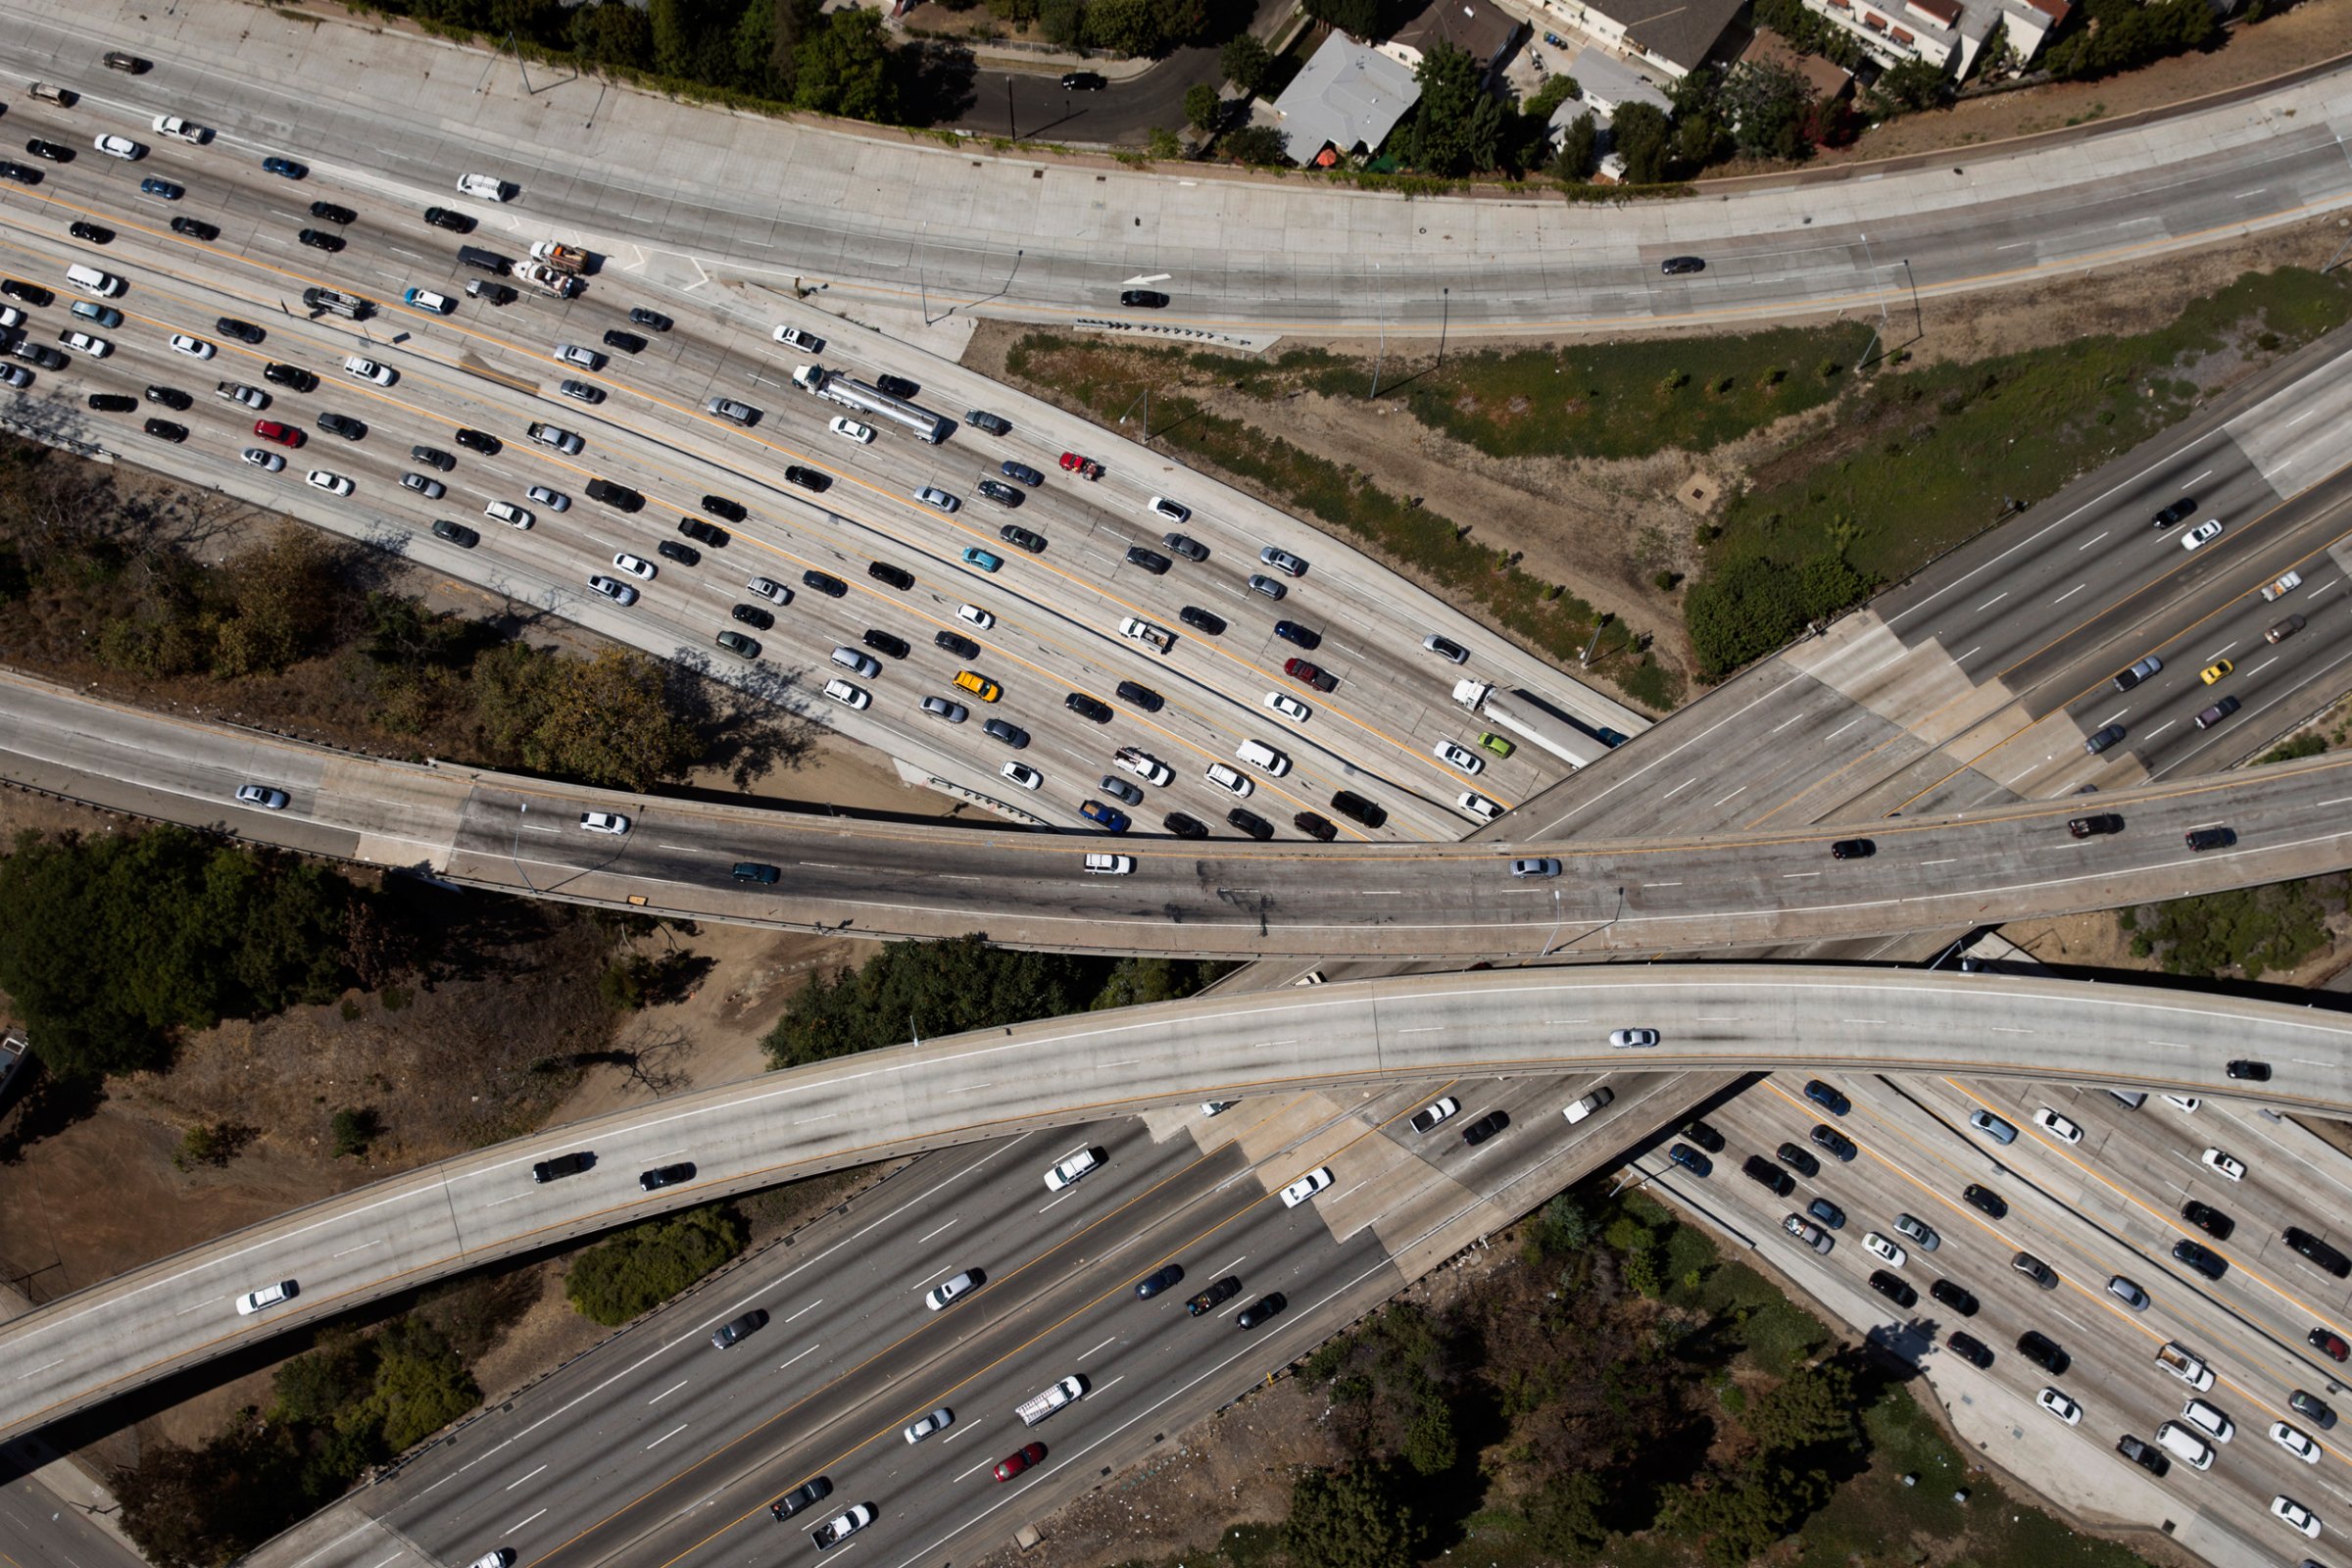 Traffic congestion from lost productivity, energy use and wear on vehicles costs $160 billion annually